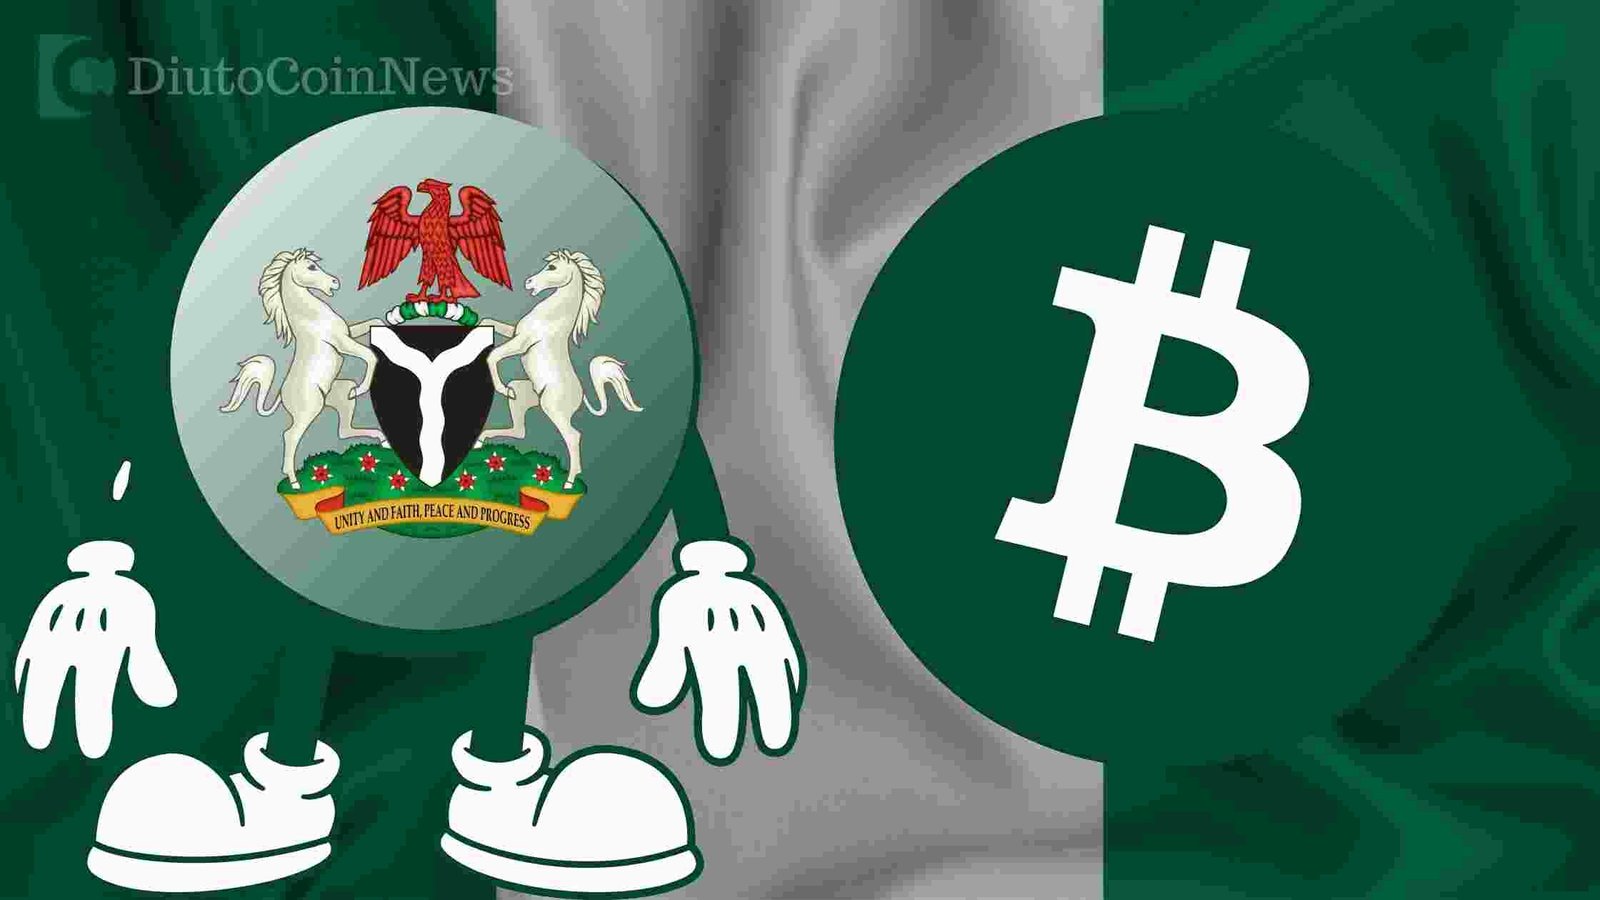 Nigeria Inflation Reaches 17 Year High, Nears 20% As Crypto Traders Go For Stablecoin USDT, BUSD.